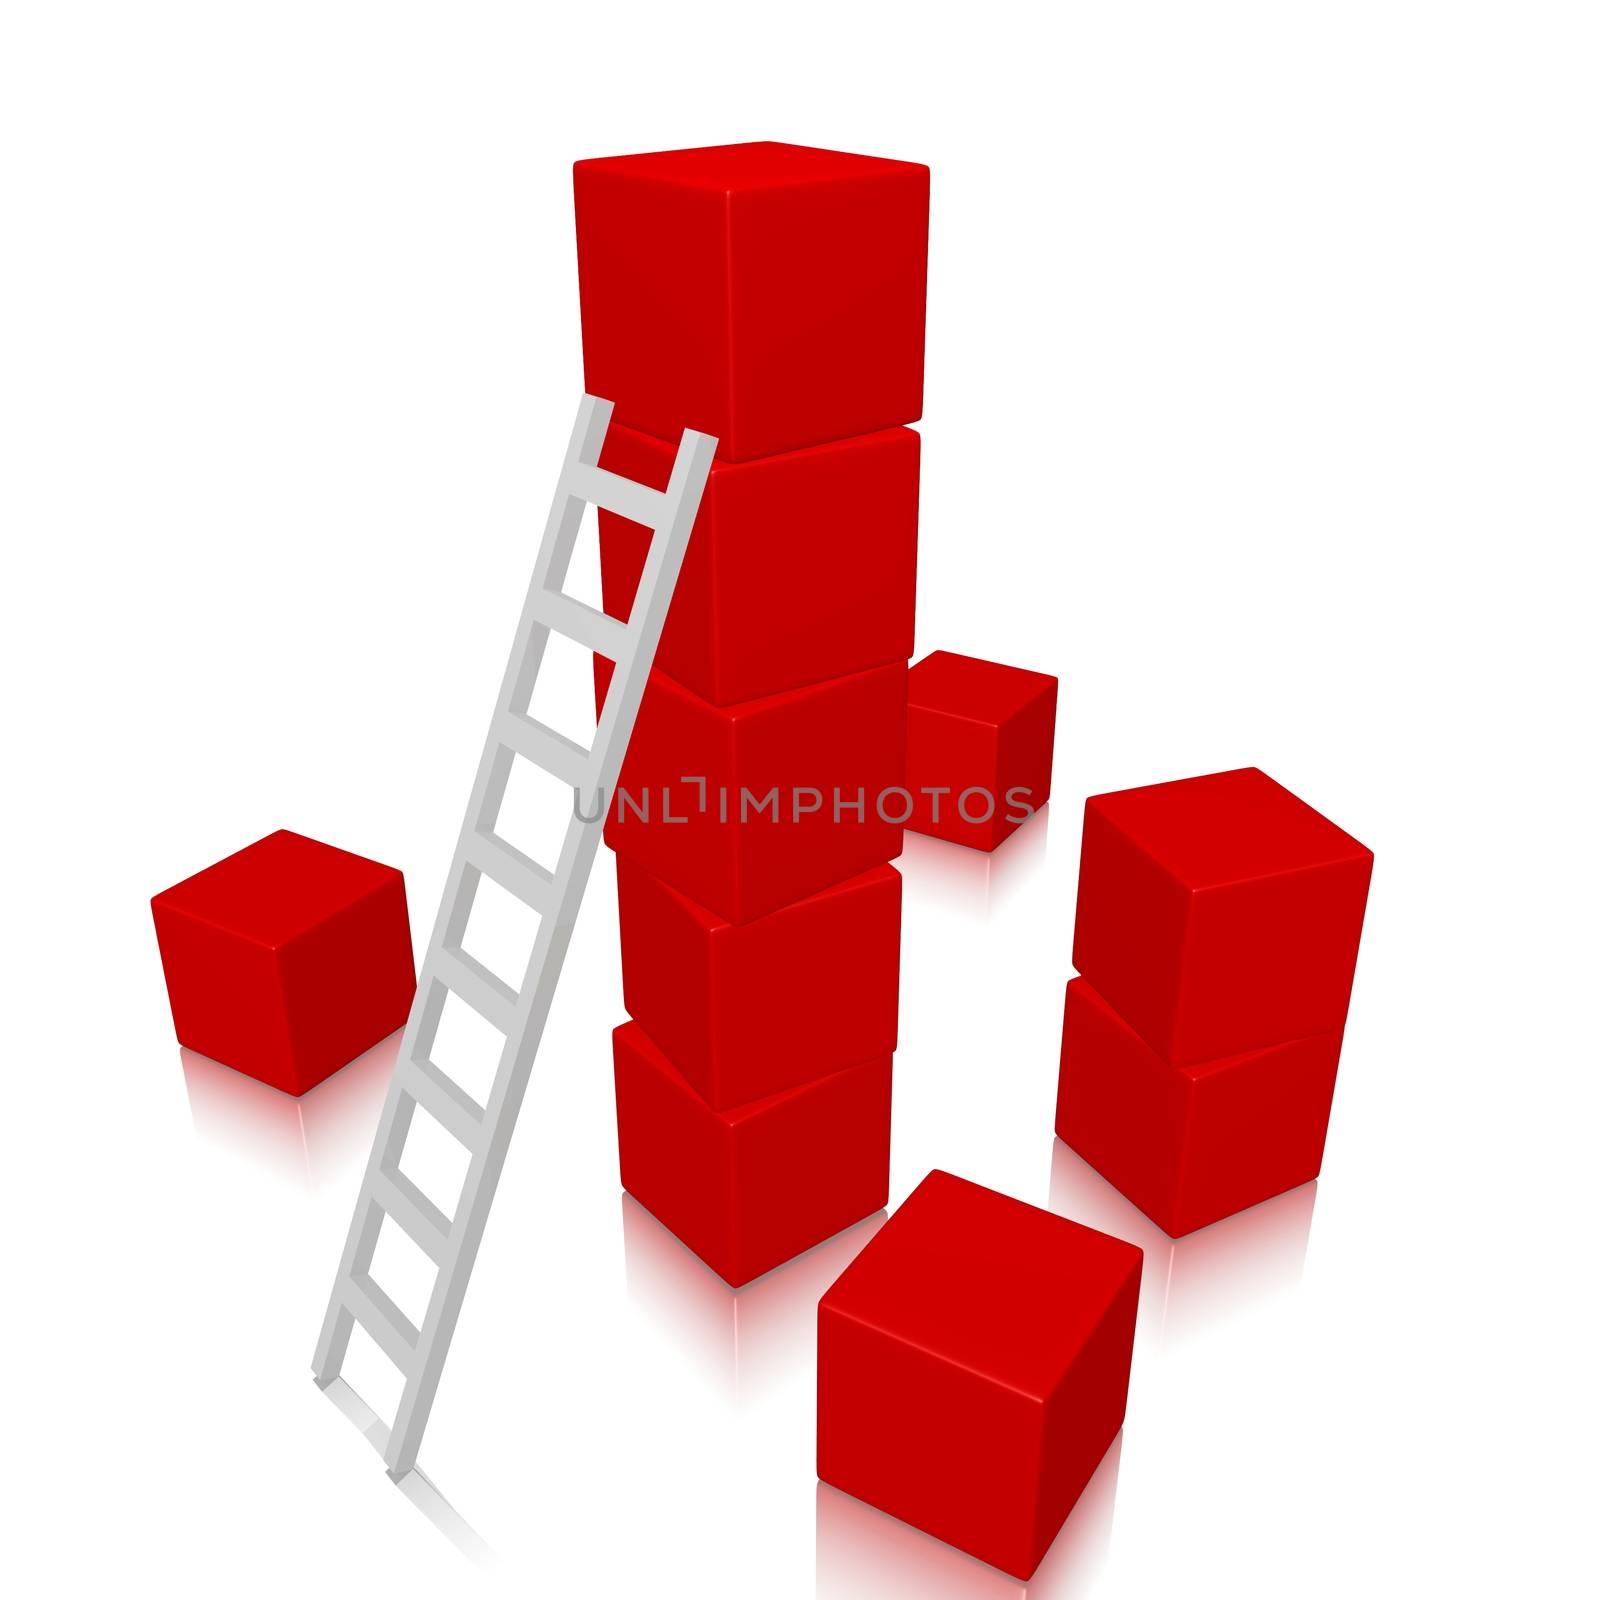 A white ladder against a tall stack of red 3d cubes, with some cubes scattered on the floor. Can be used for success, achievement, organizing, building and progress concepts.